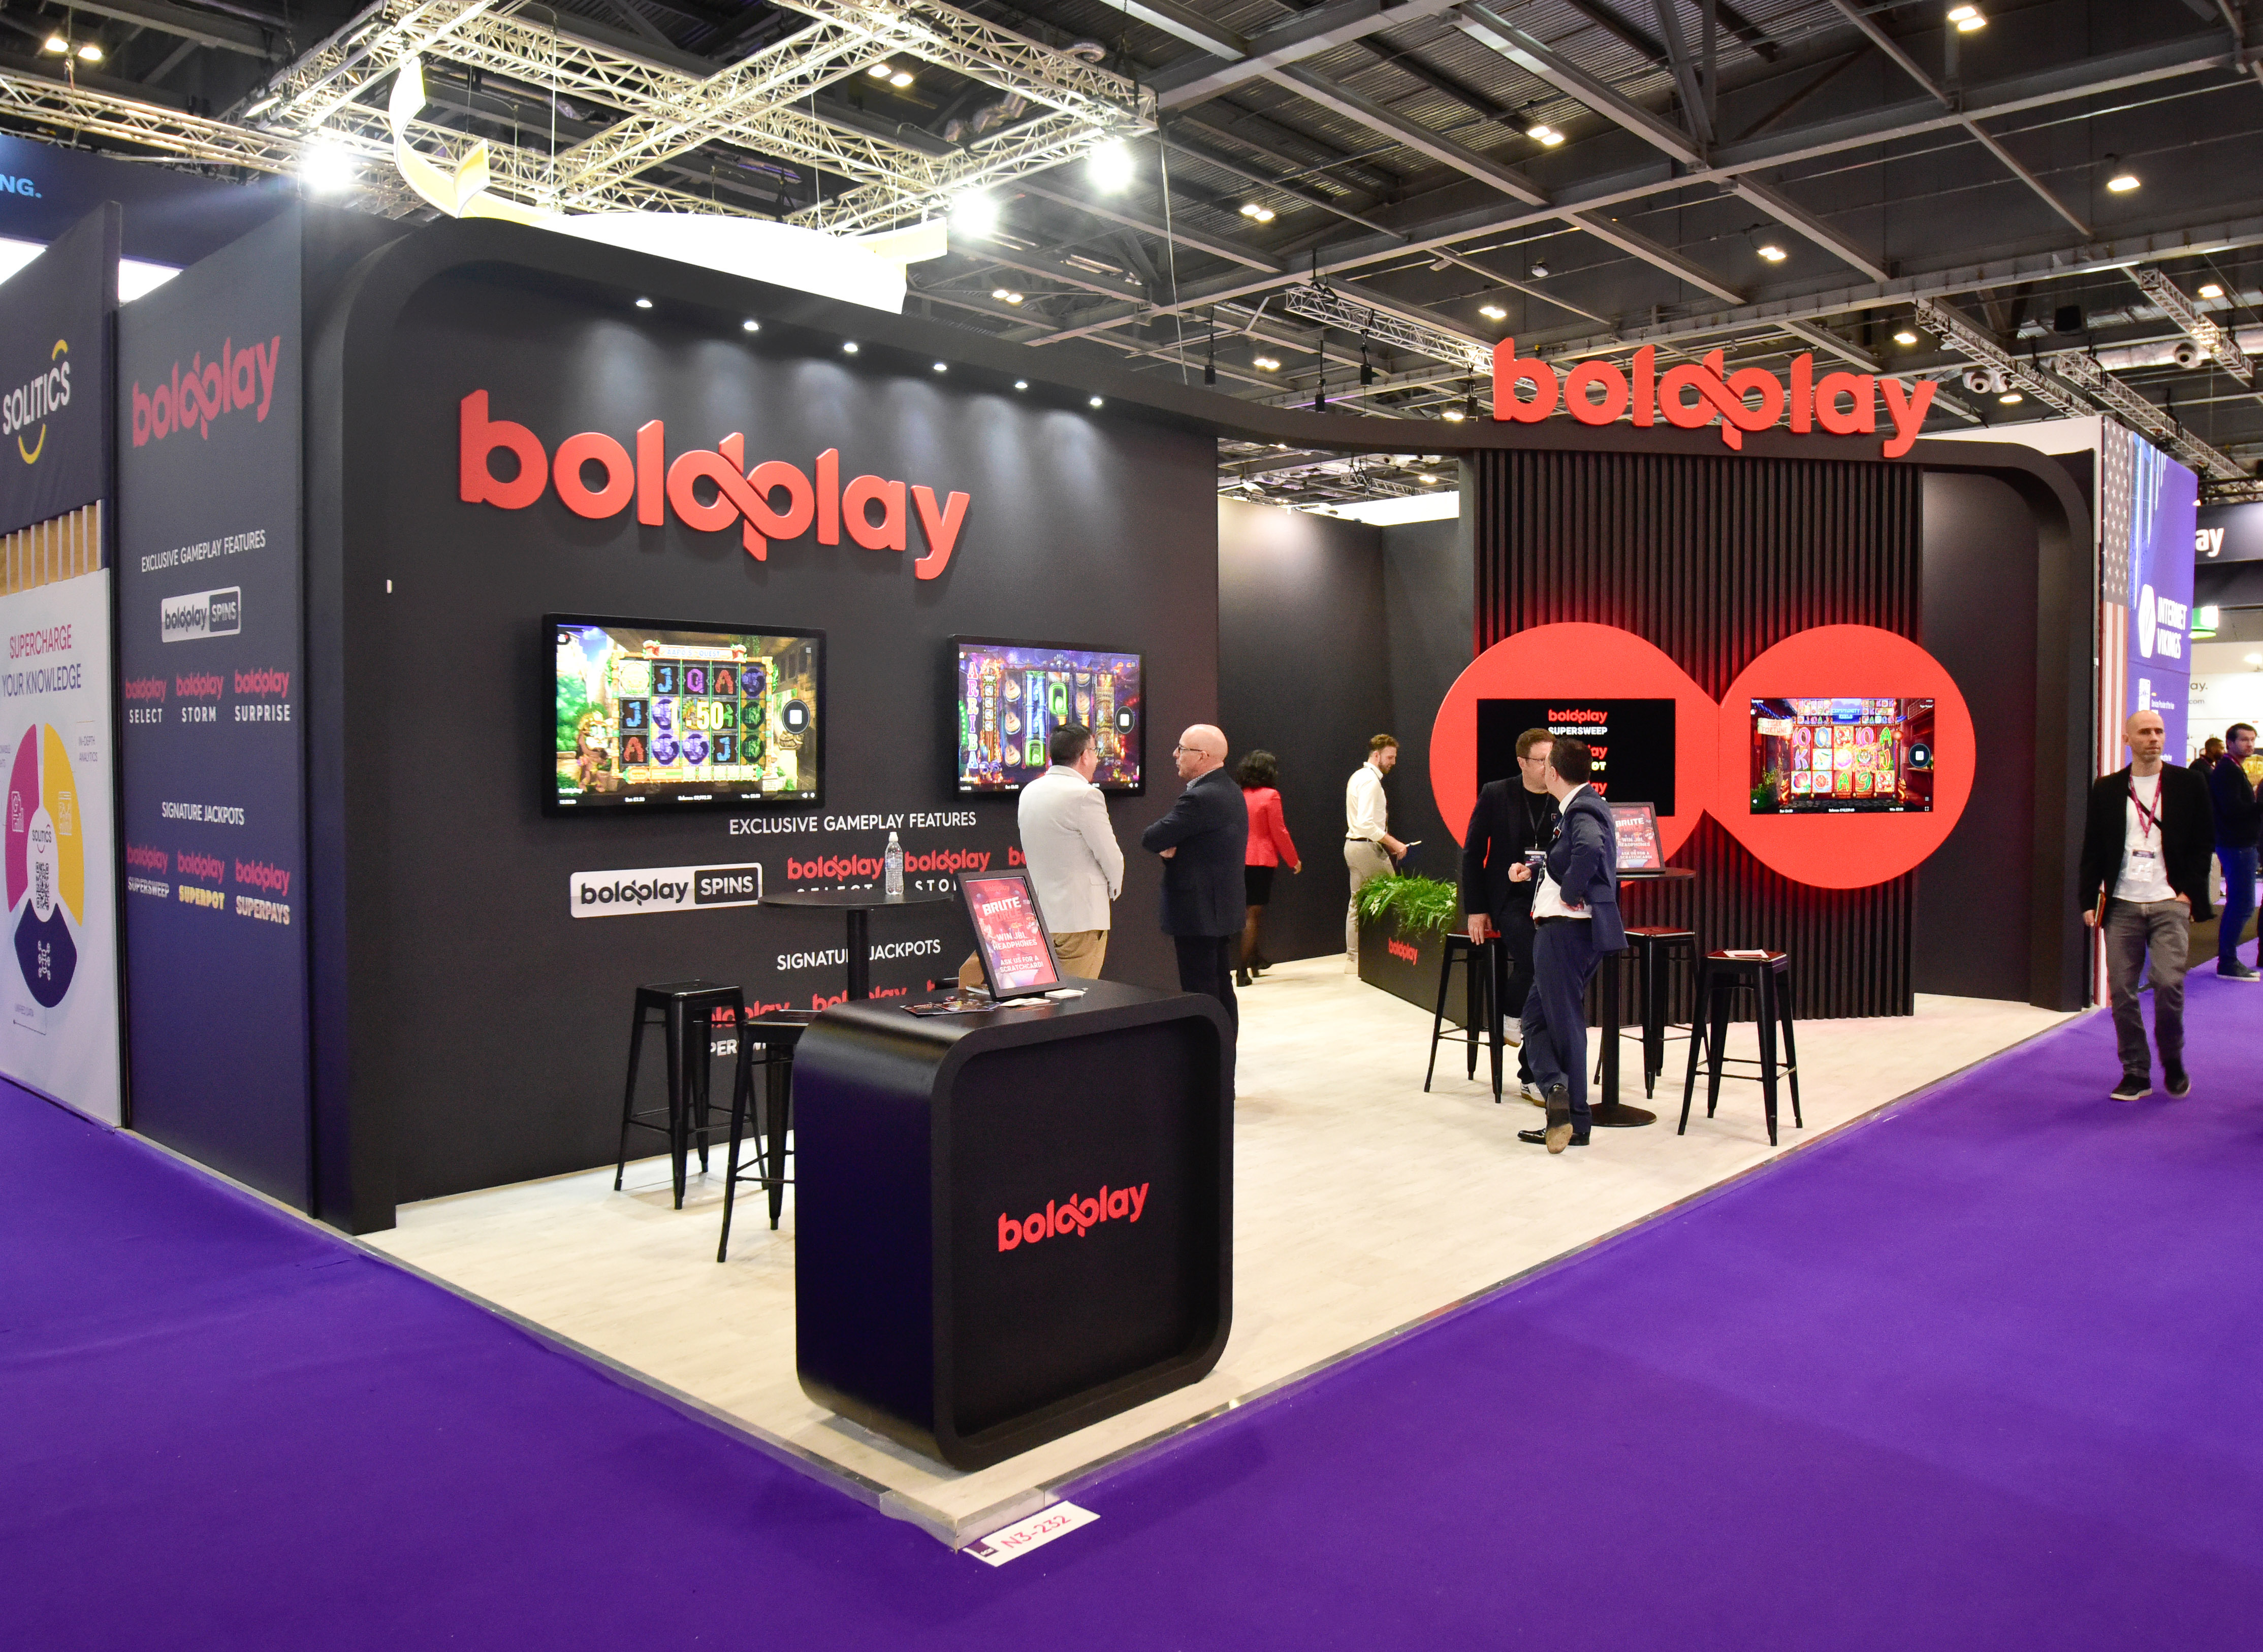 Modular Exhibition Stands - Reconfigurable for multiple events